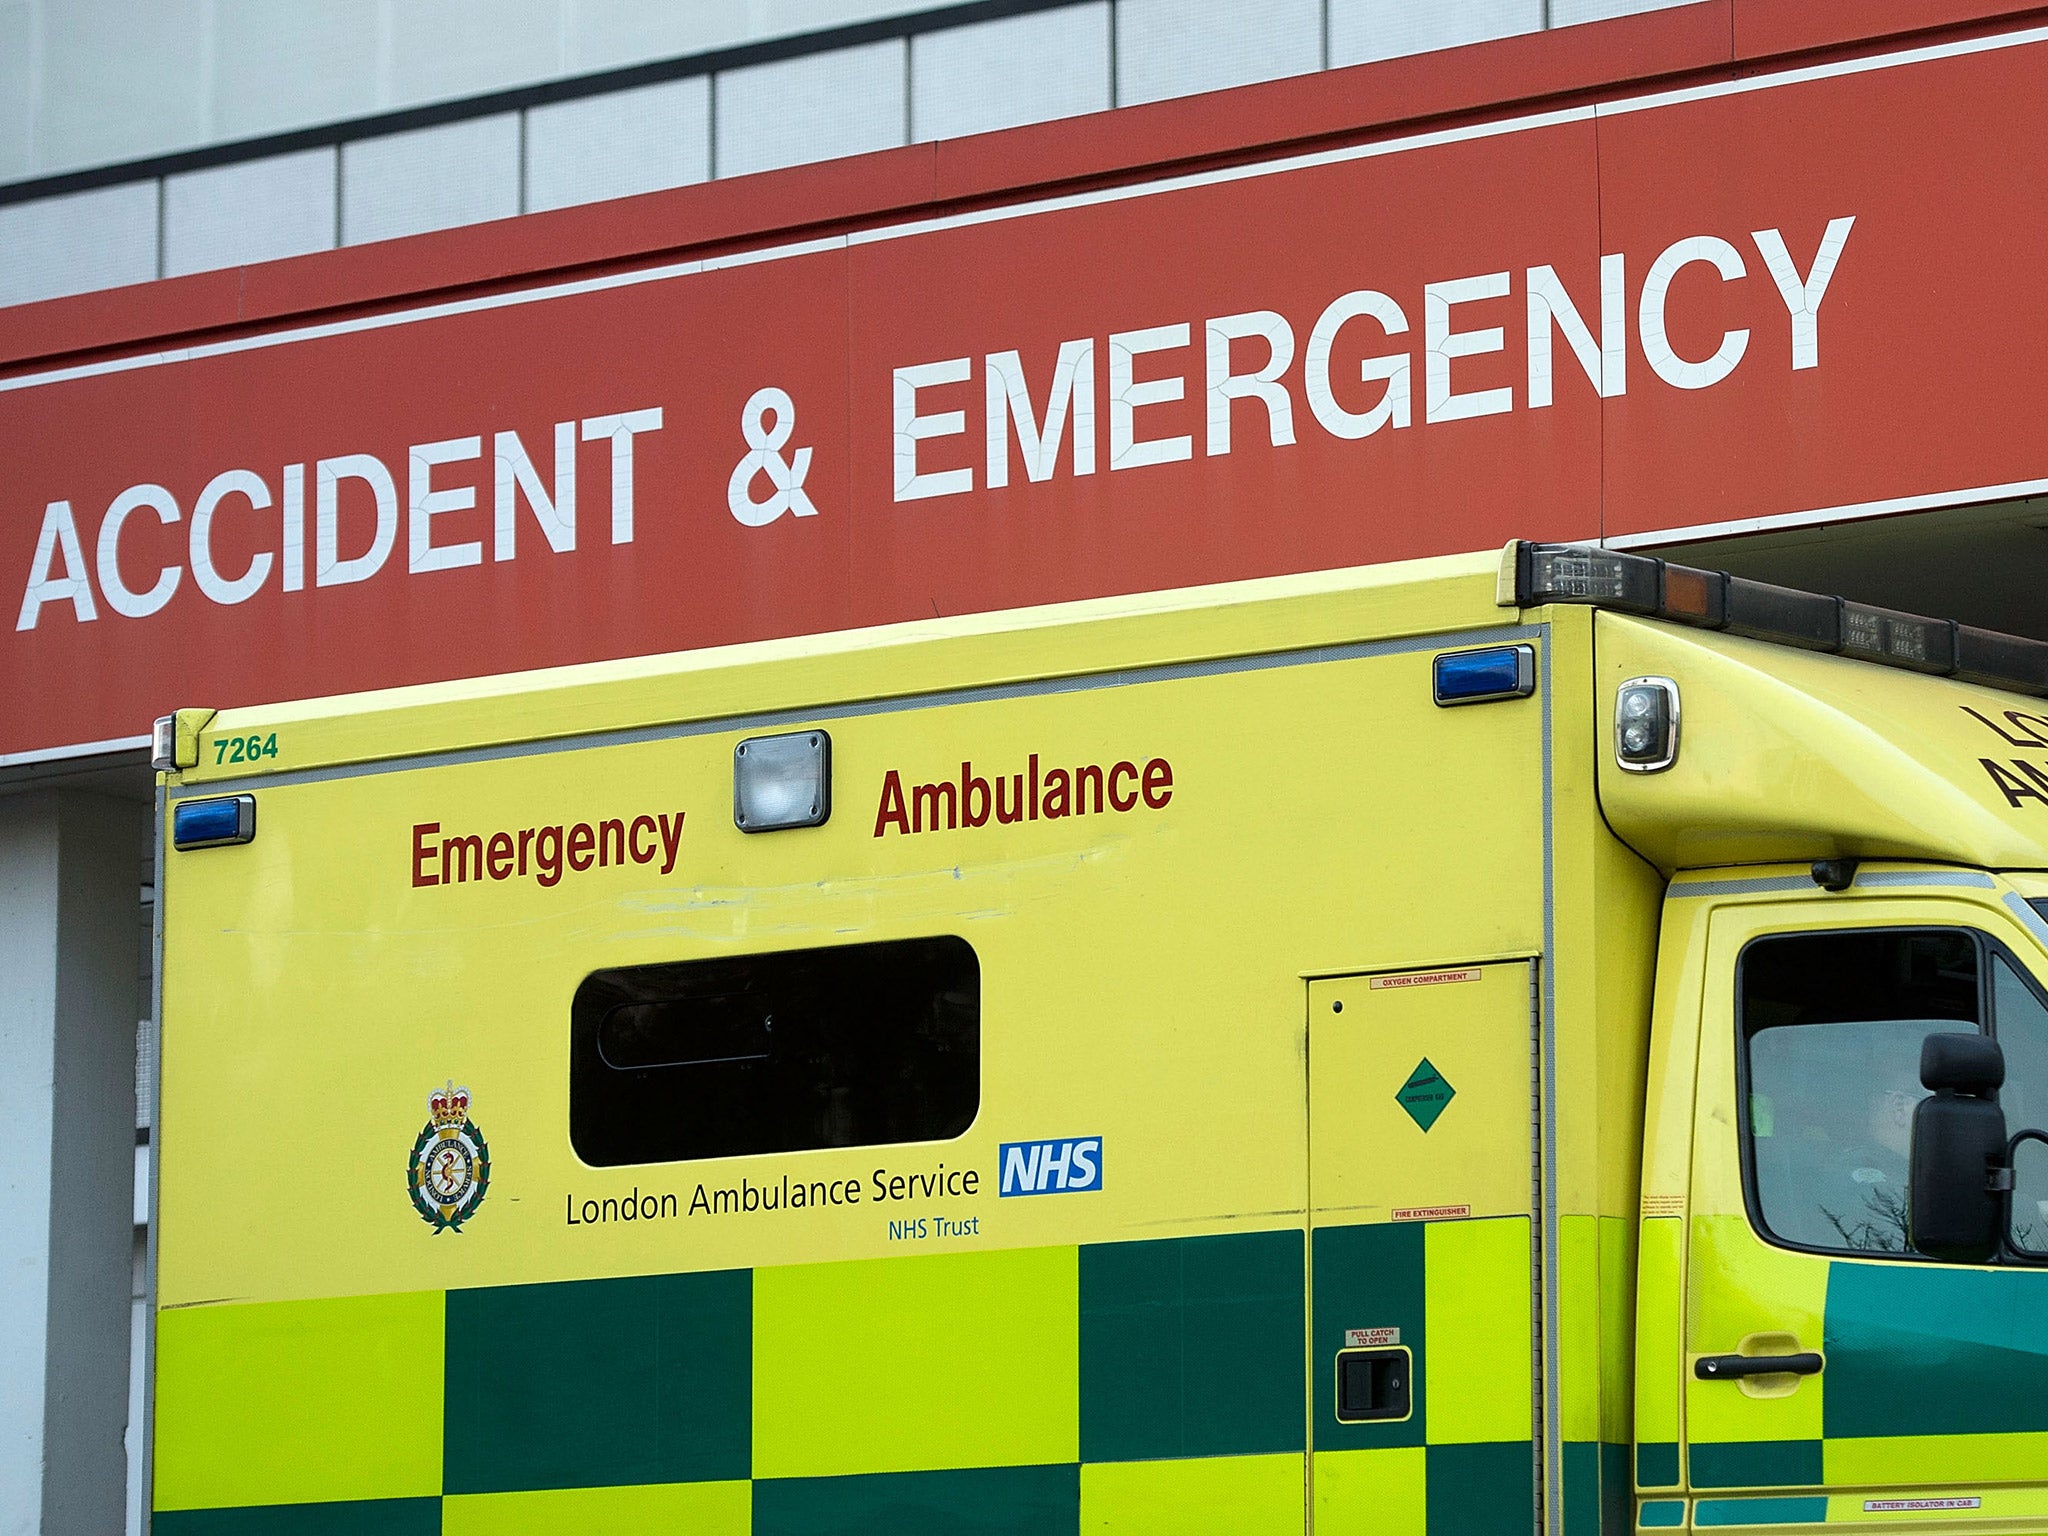 Ambulance chiefs said delays in admitting patients meant they were struggling to find enough ambulances to cover 999 calls (Getty)